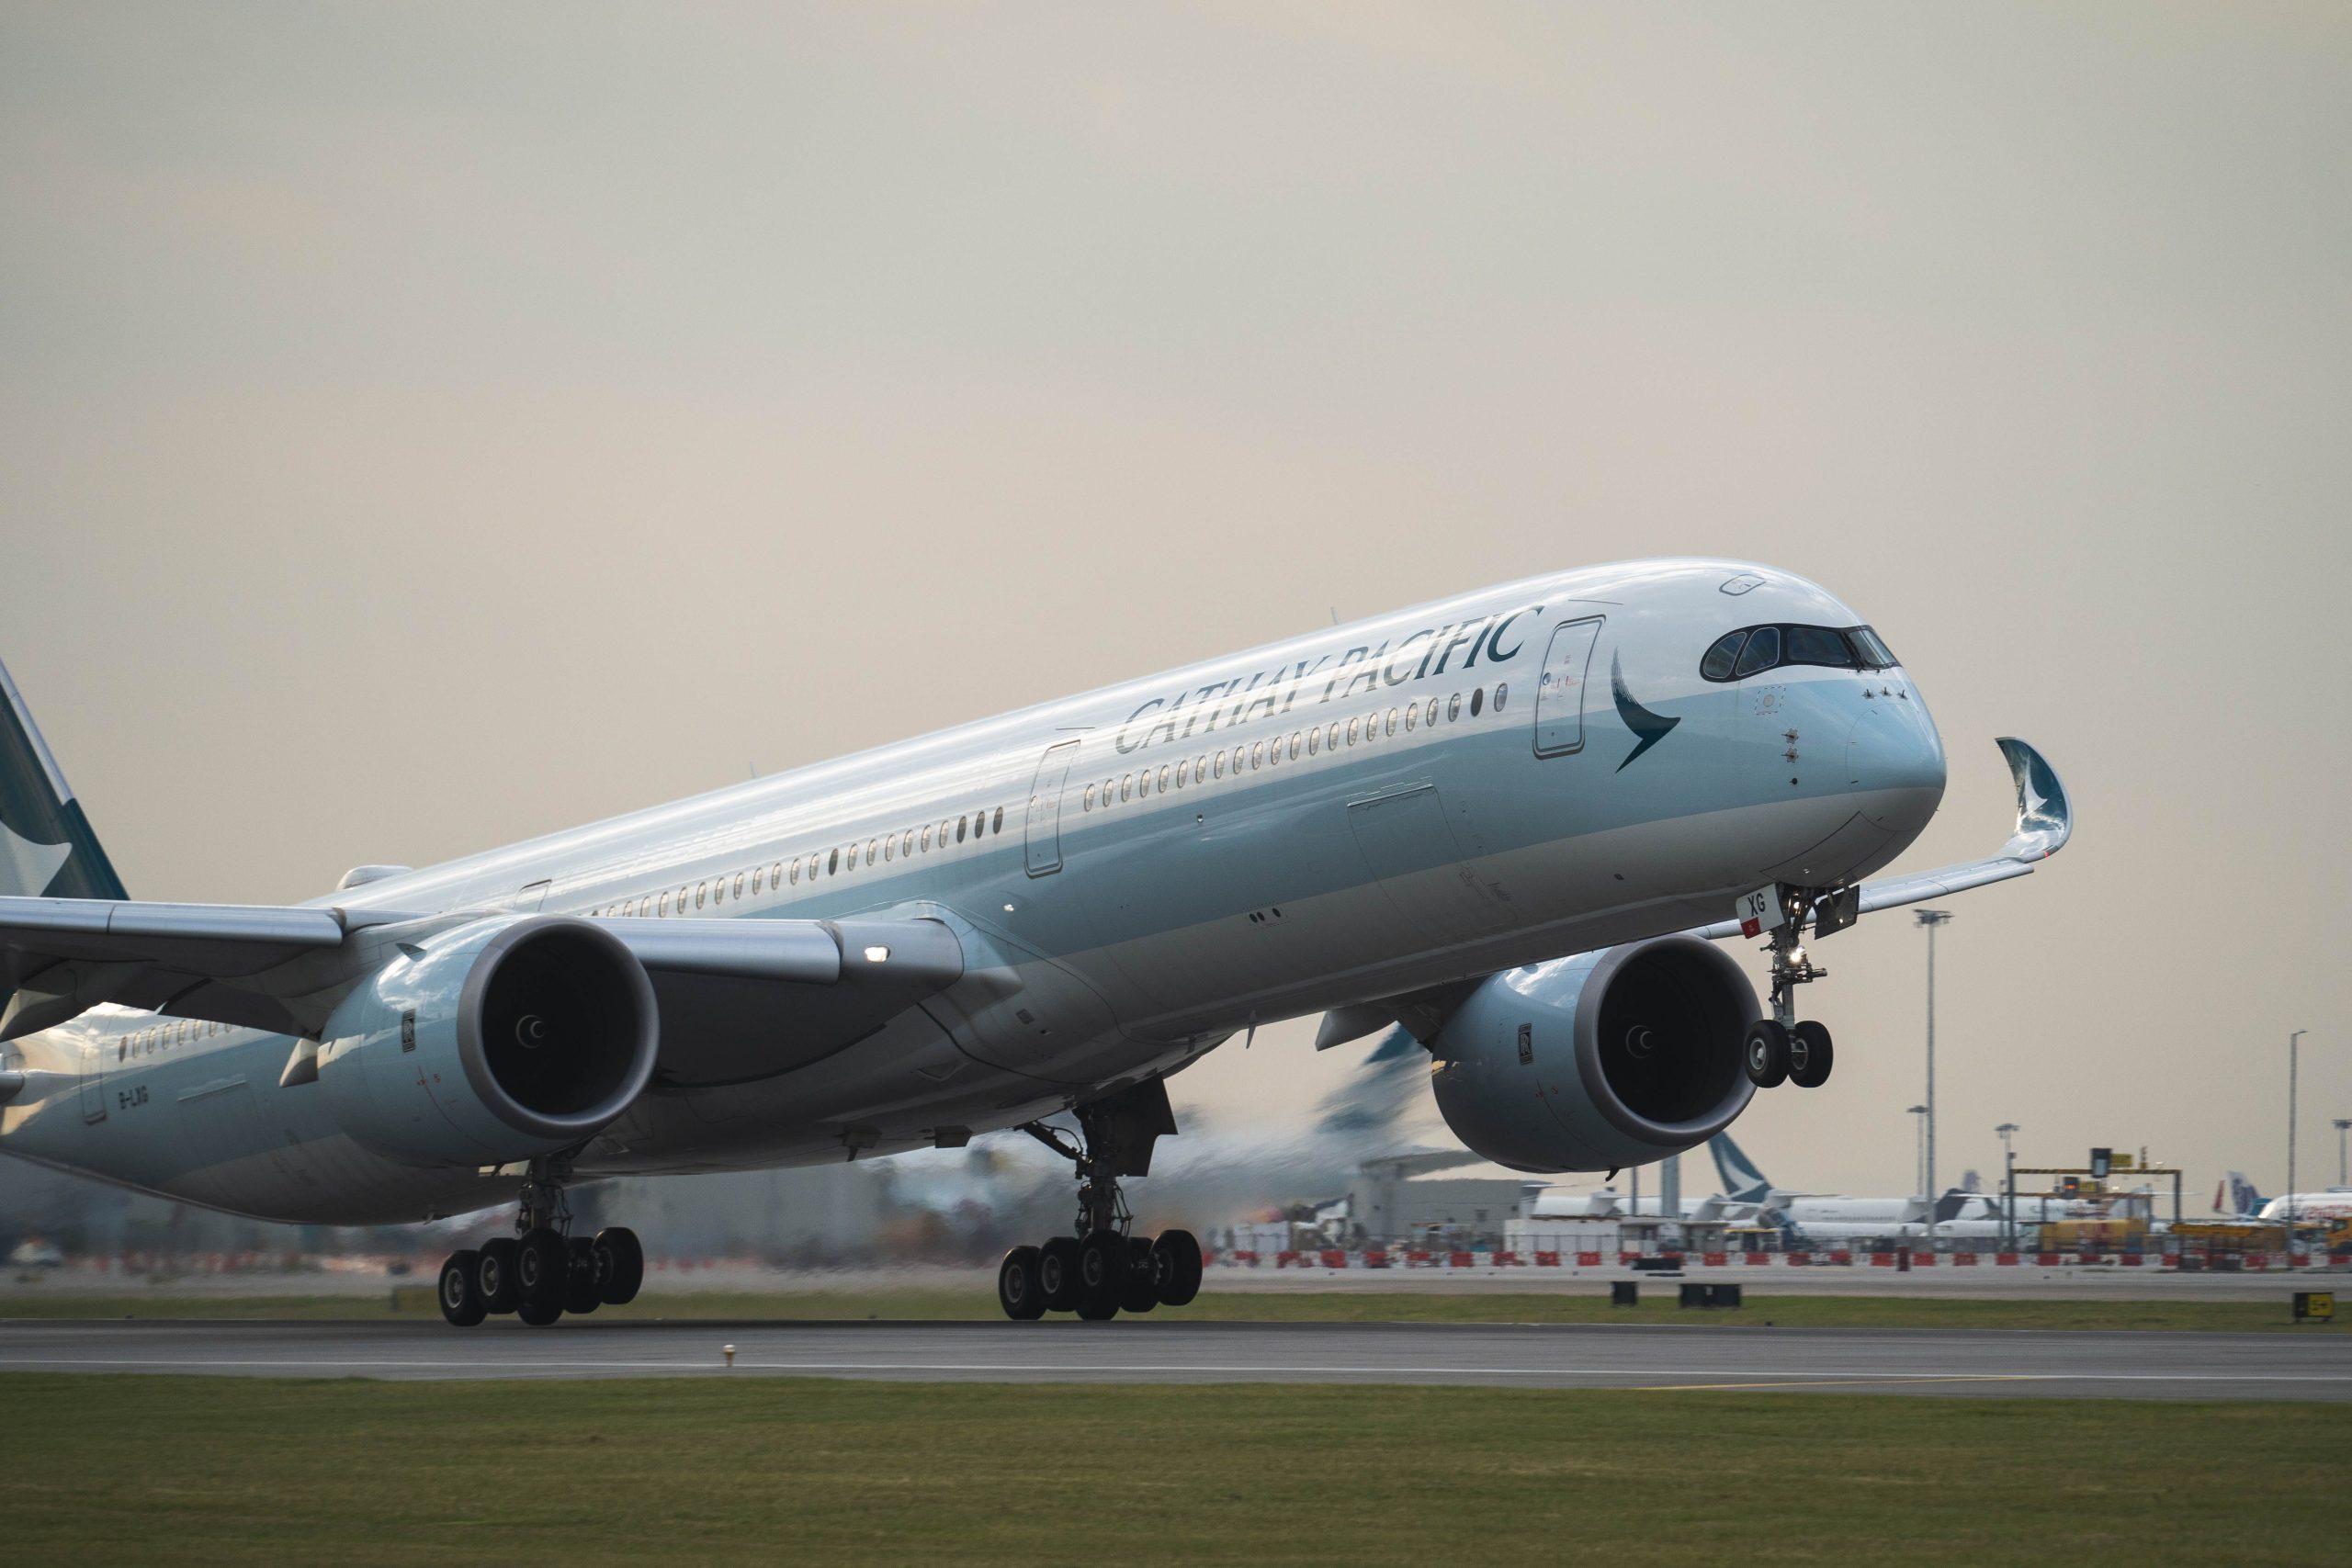 Cathay Pacific Free Tickets campaign lands in India, Bangladesh, Nepal